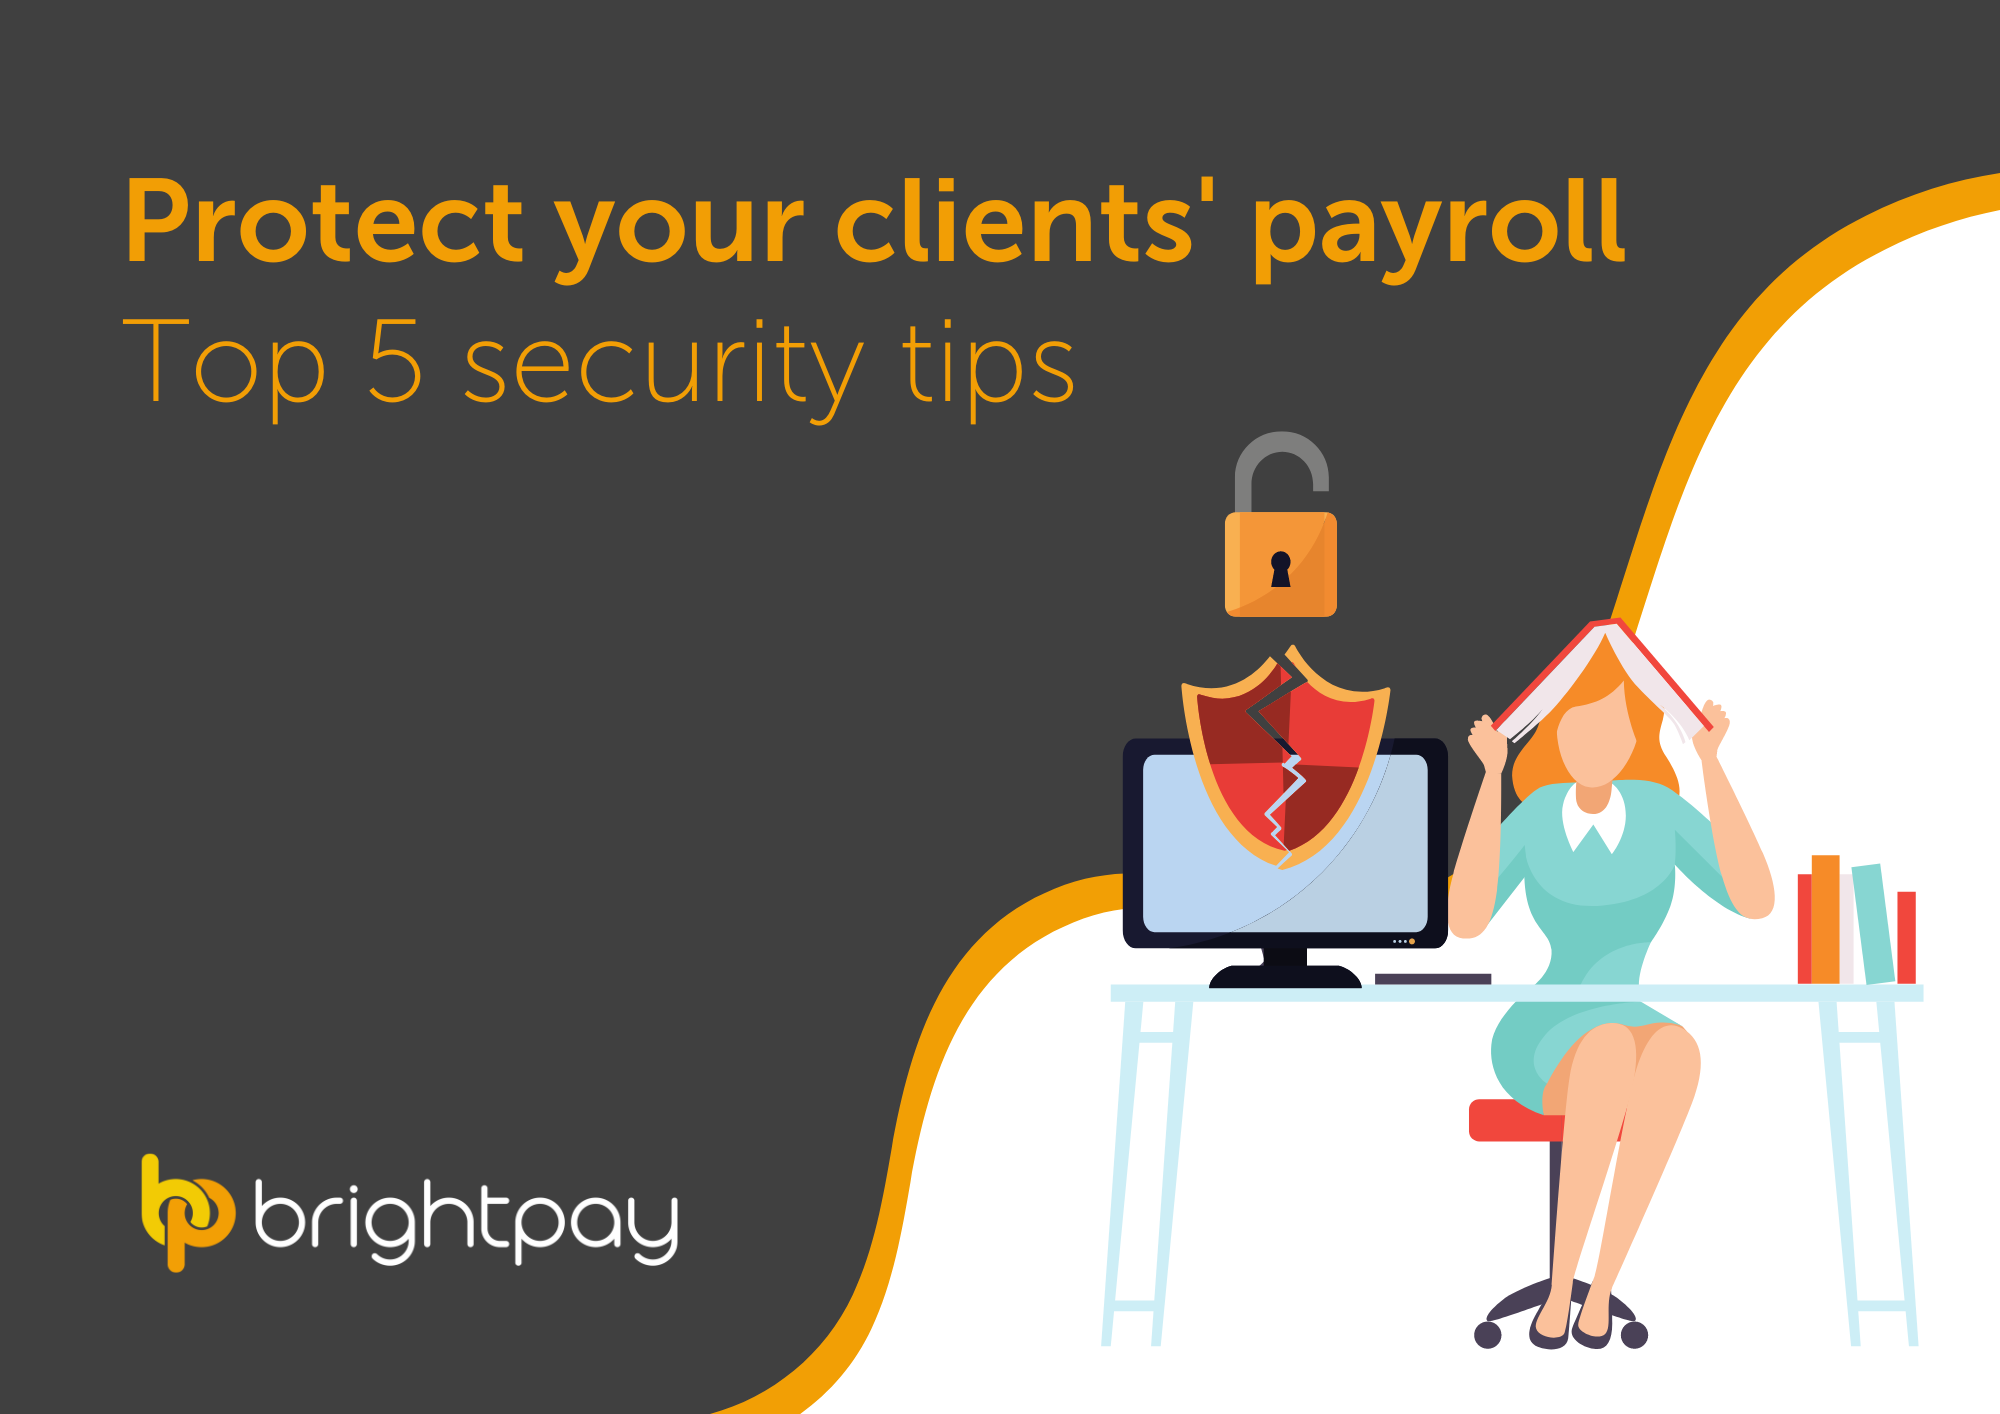 Protect your clients’ payroll: Top 5 security tips - Free Guide ...